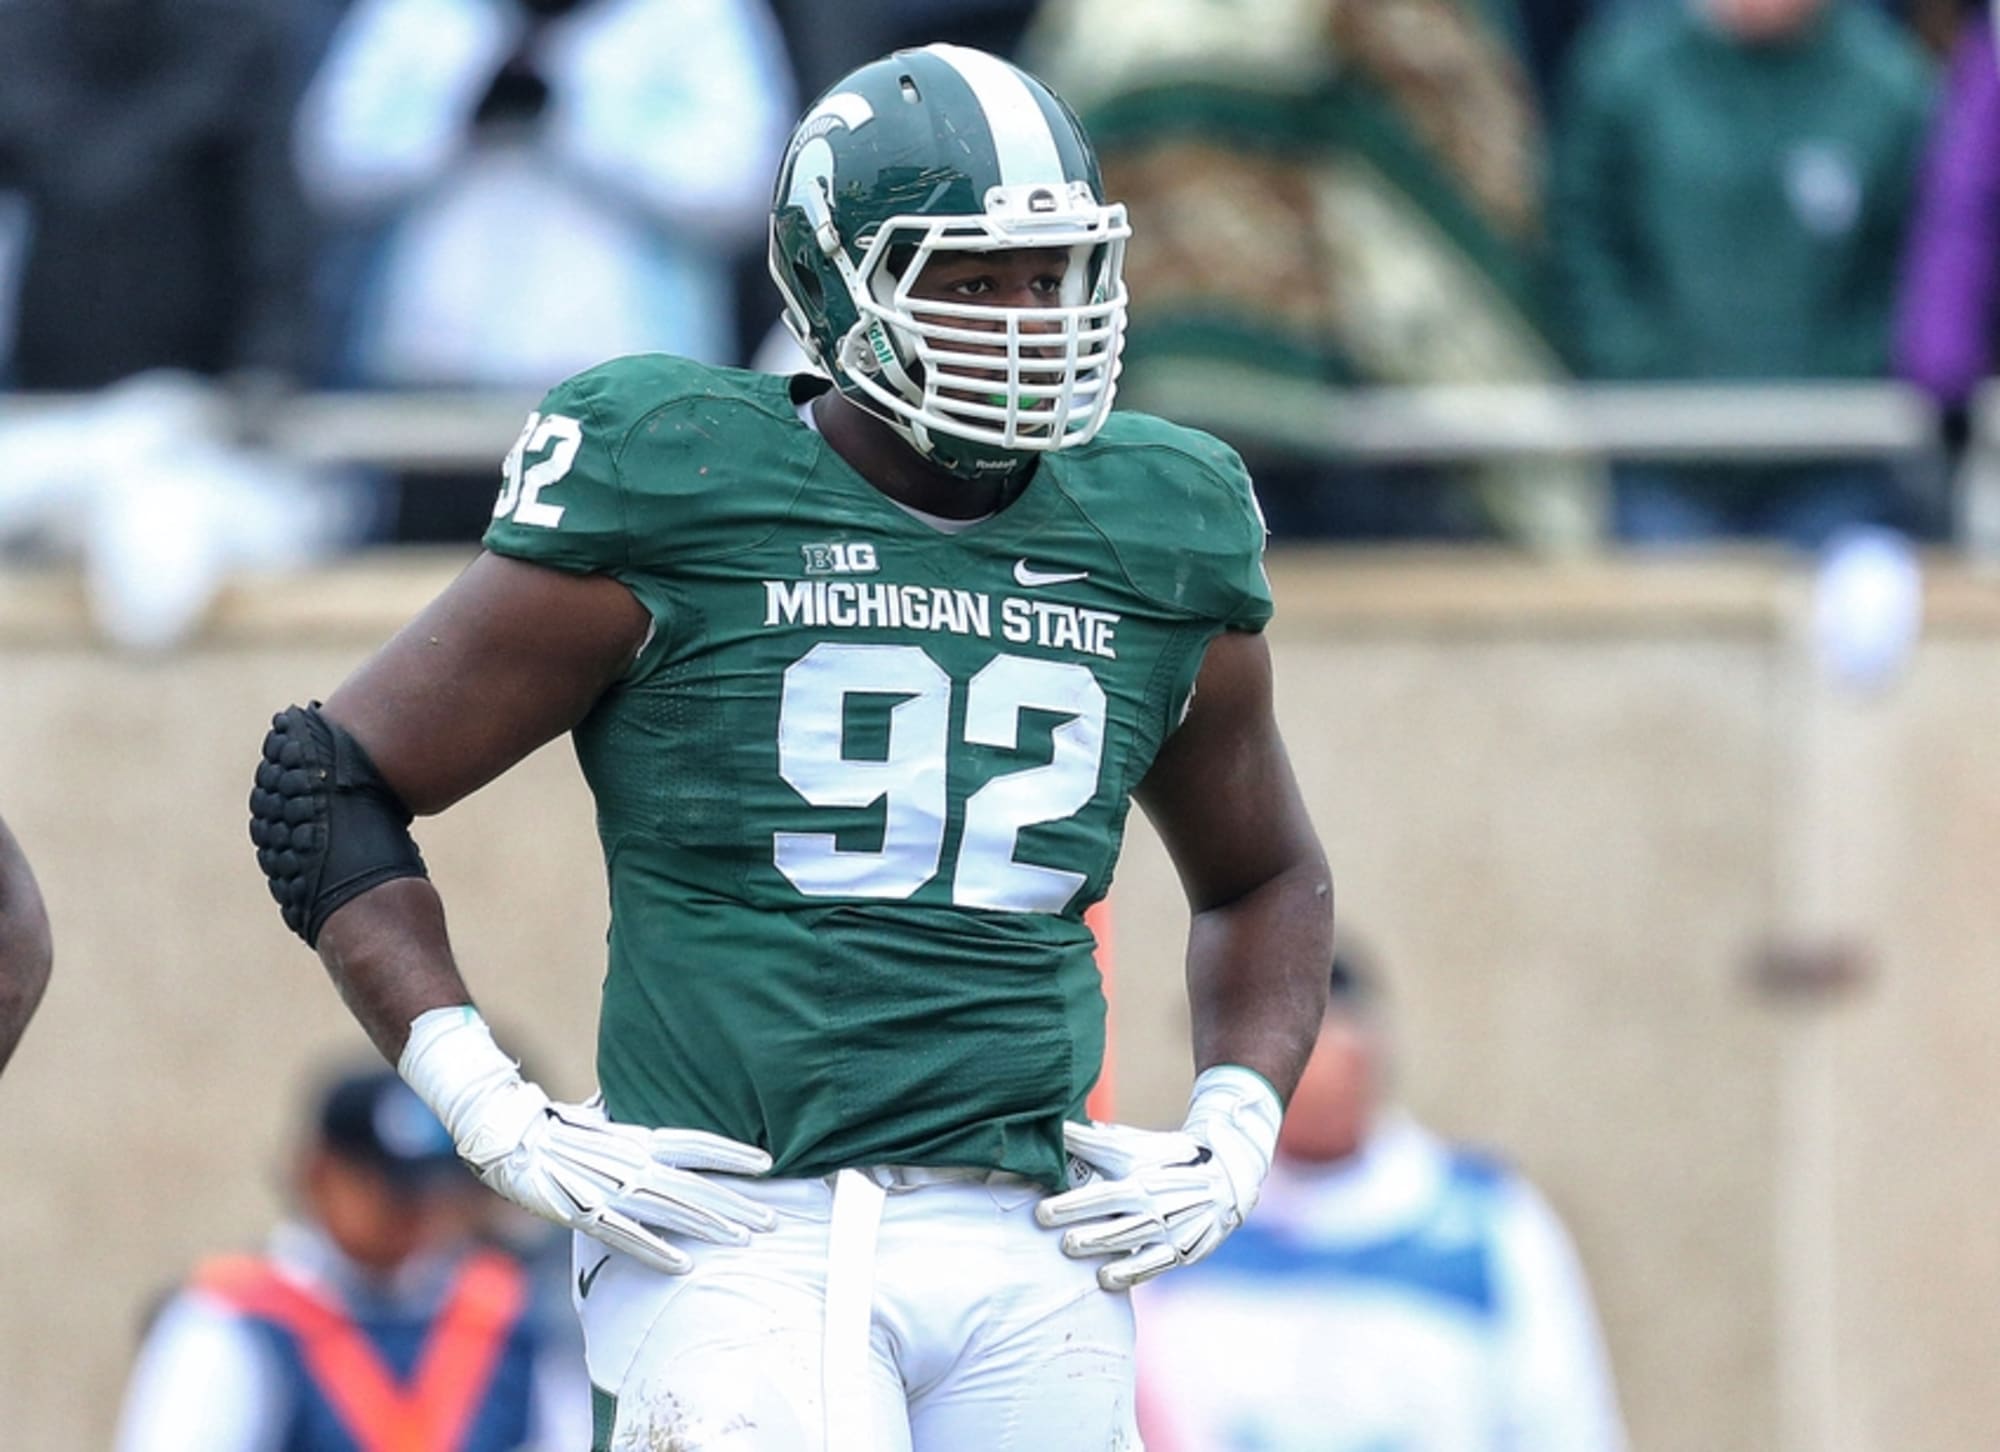 Report: Michigan State DT Joel Heath Met with the Colts